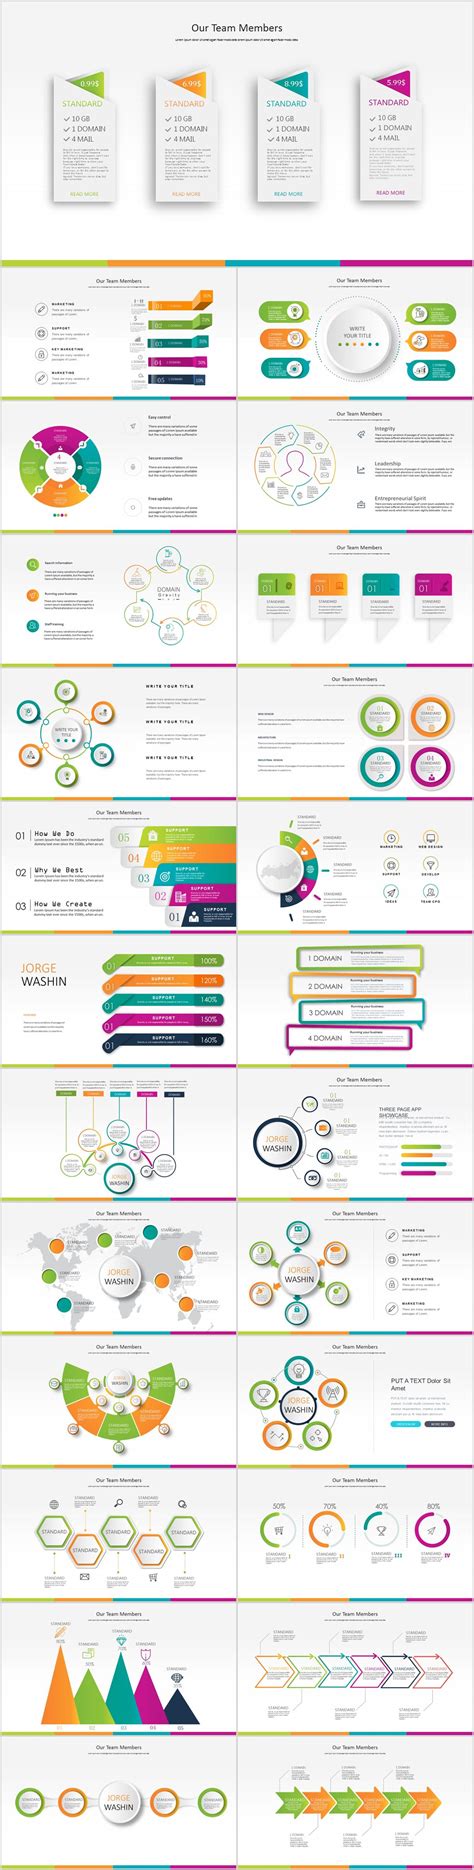 27 Red Business Year Plan Powerpoint Template On Behance Powerpoint